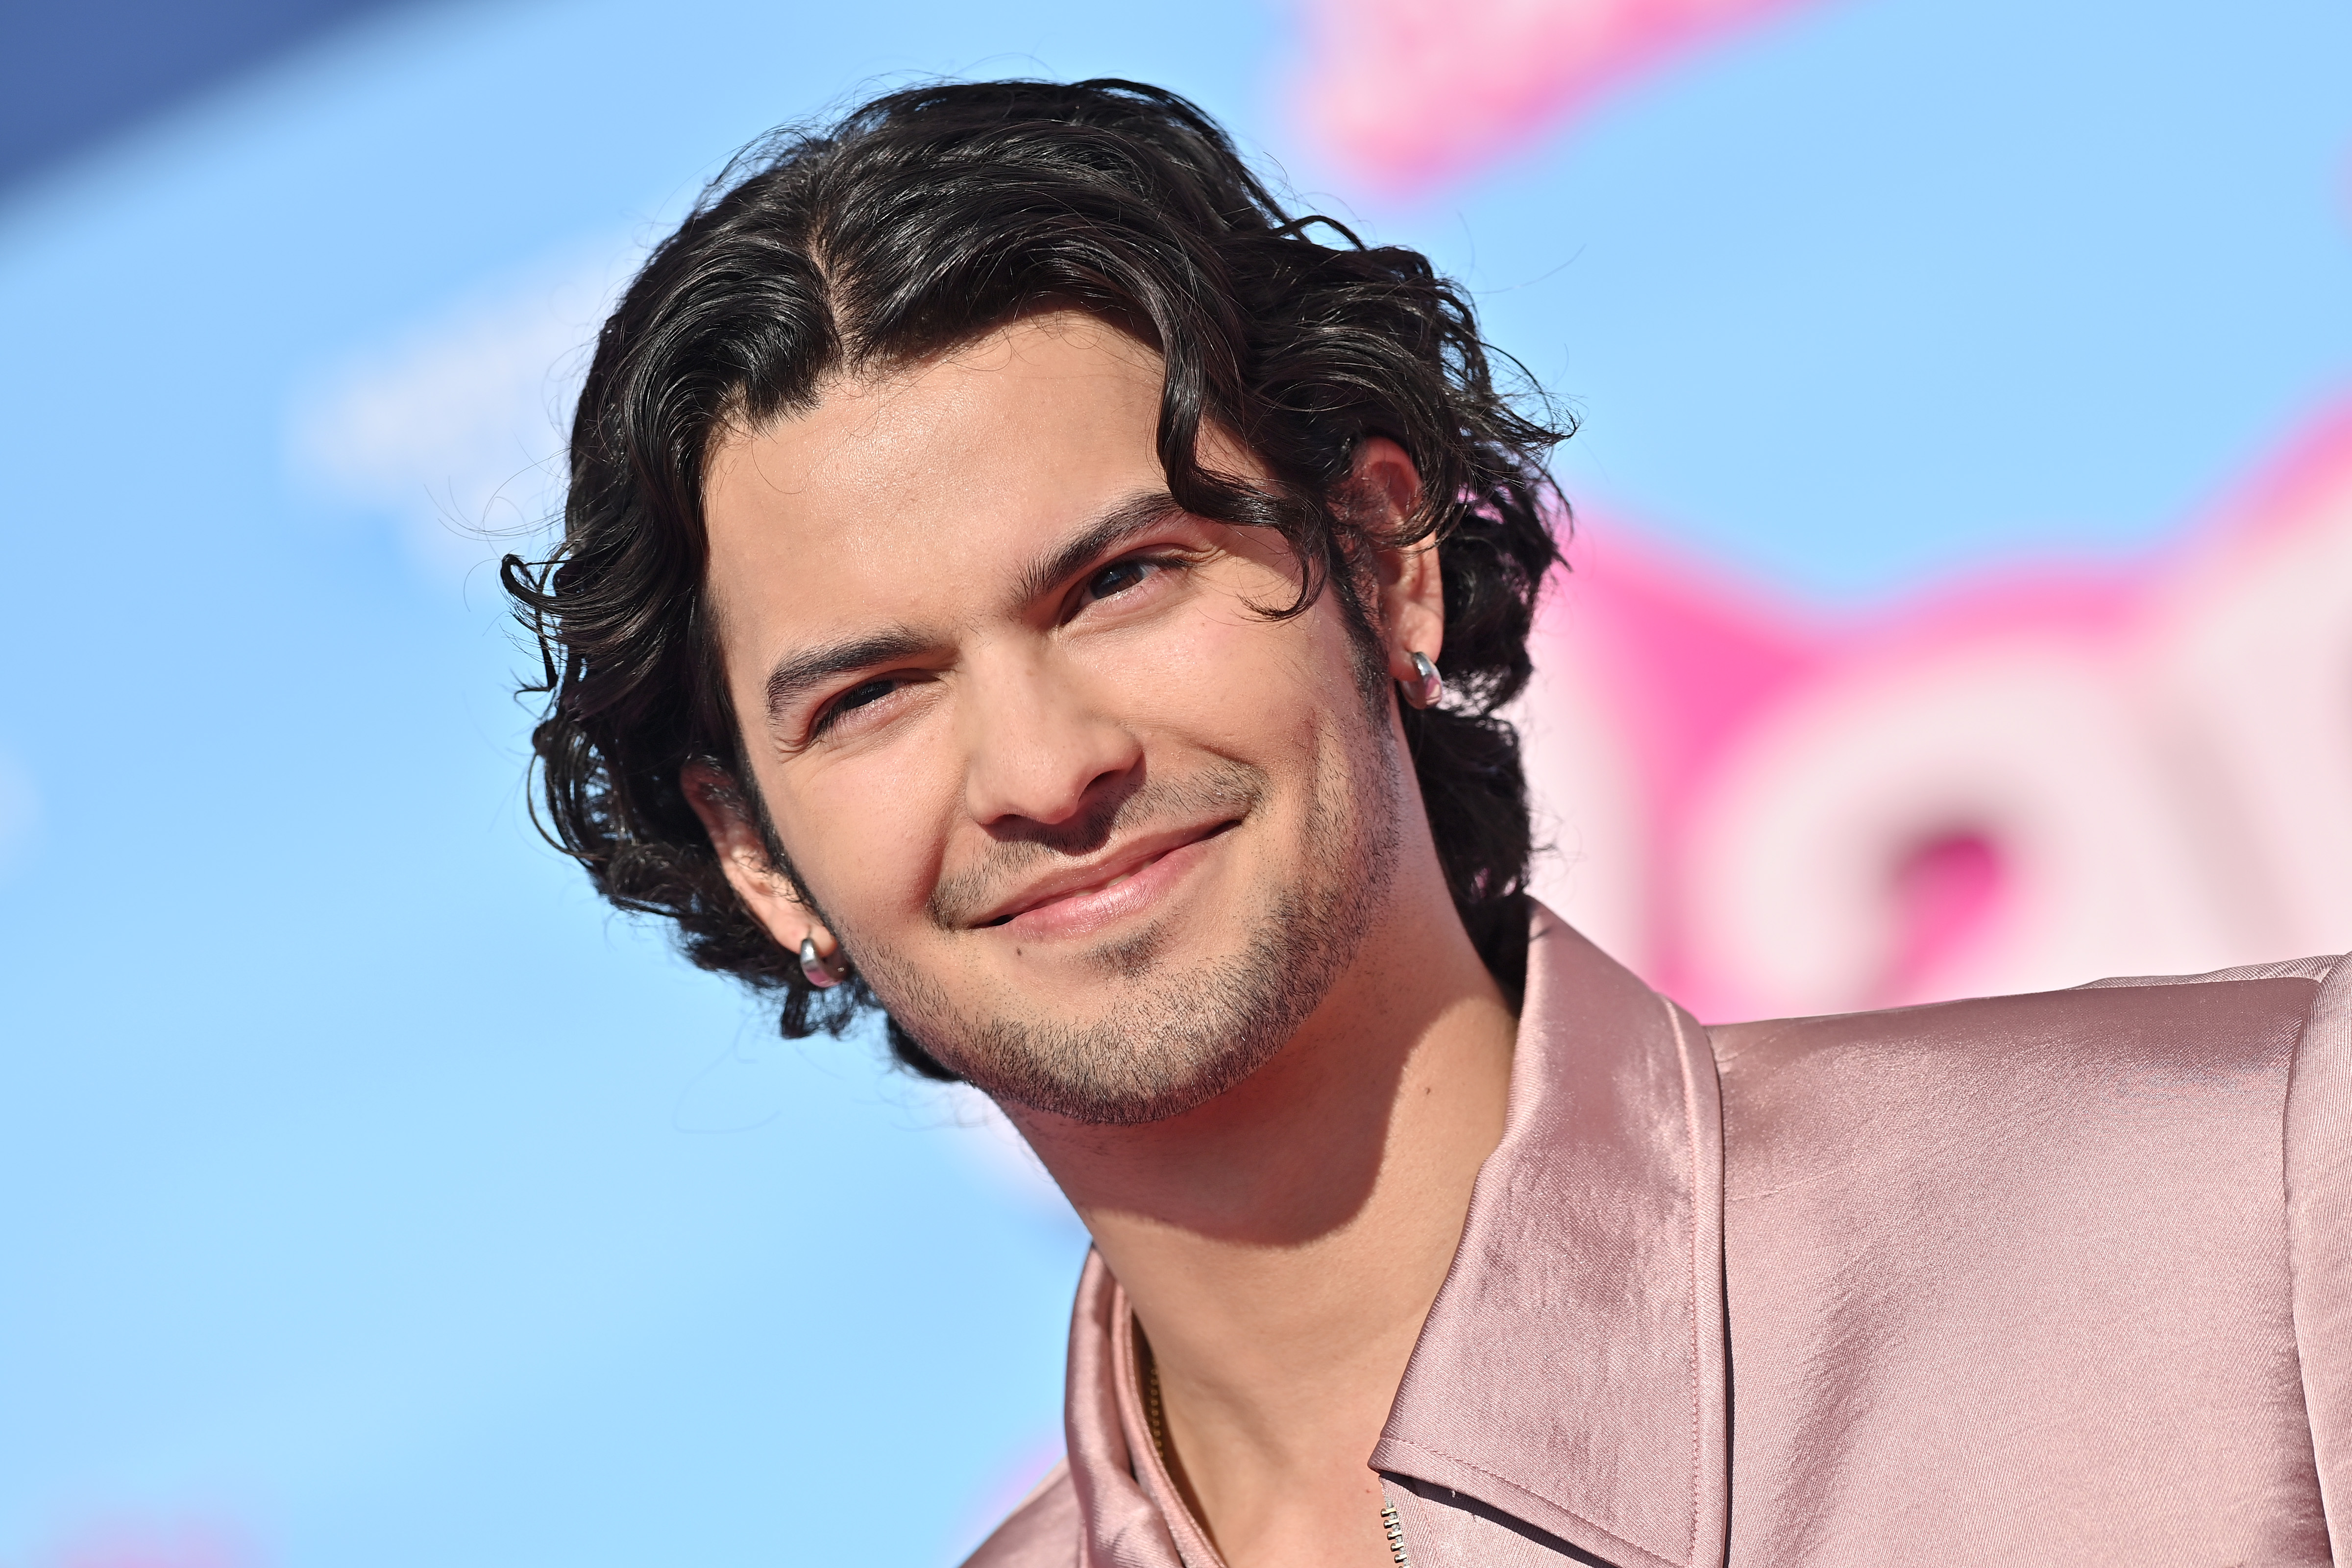 Xolo Maridueña at the premiere of "Barbie" on July 9, 2023, in Los Angeles, California. | Source: Getty Images